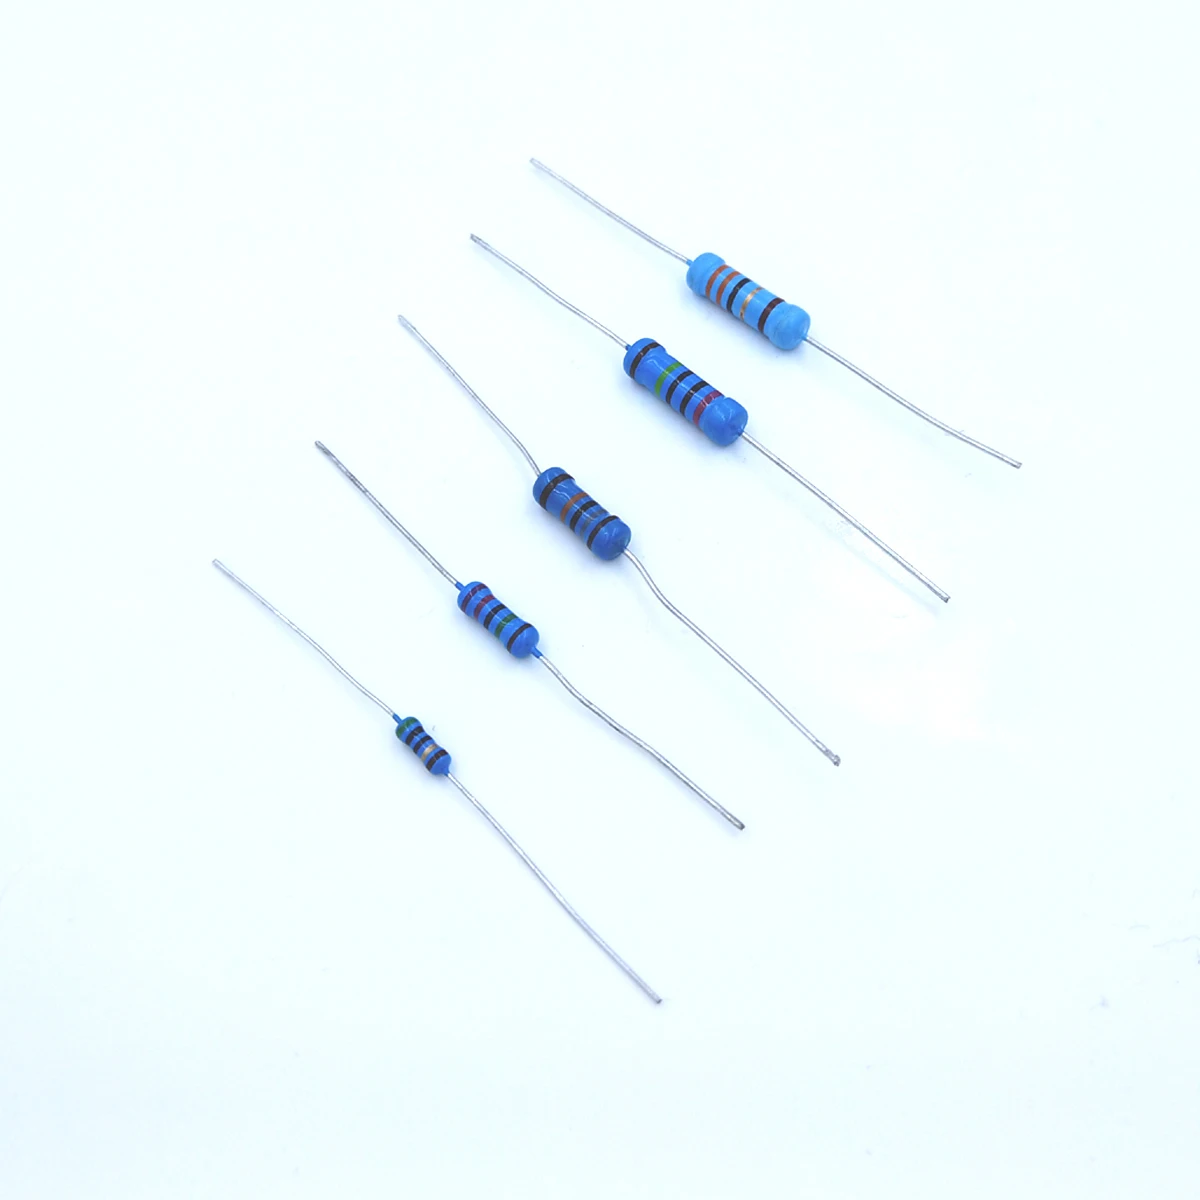 

100Pcs 2.2R 2.4R 2.7R 3R 2.2Ohm 2.4Ohm 2.7Ohm 3Ohm 2.2 2.4 2.7 3 R Ohm 1/4W 1% Metal Film Resistor Colored ring Resistance